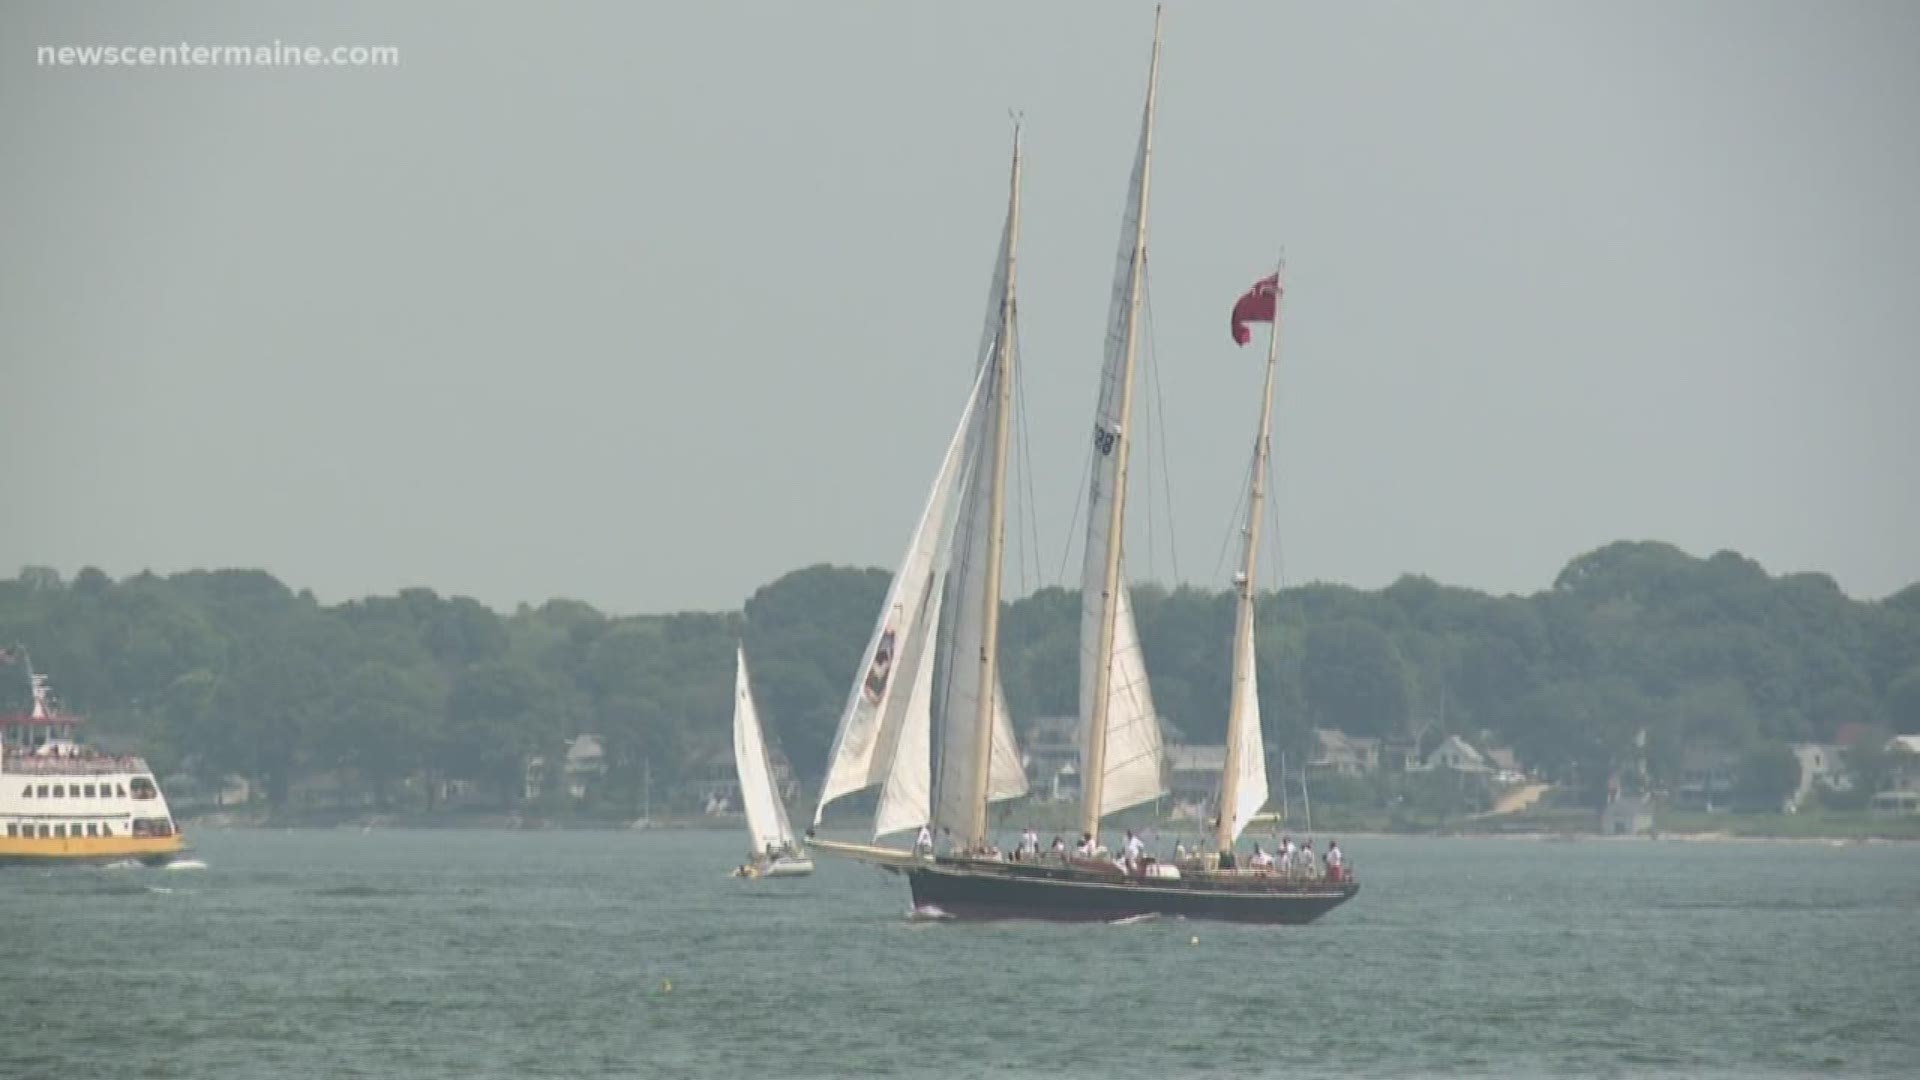 Tall Ships Maine brought together 8 teenagers from Maine and 8 teenagers from Bermuda for a week-long sail.